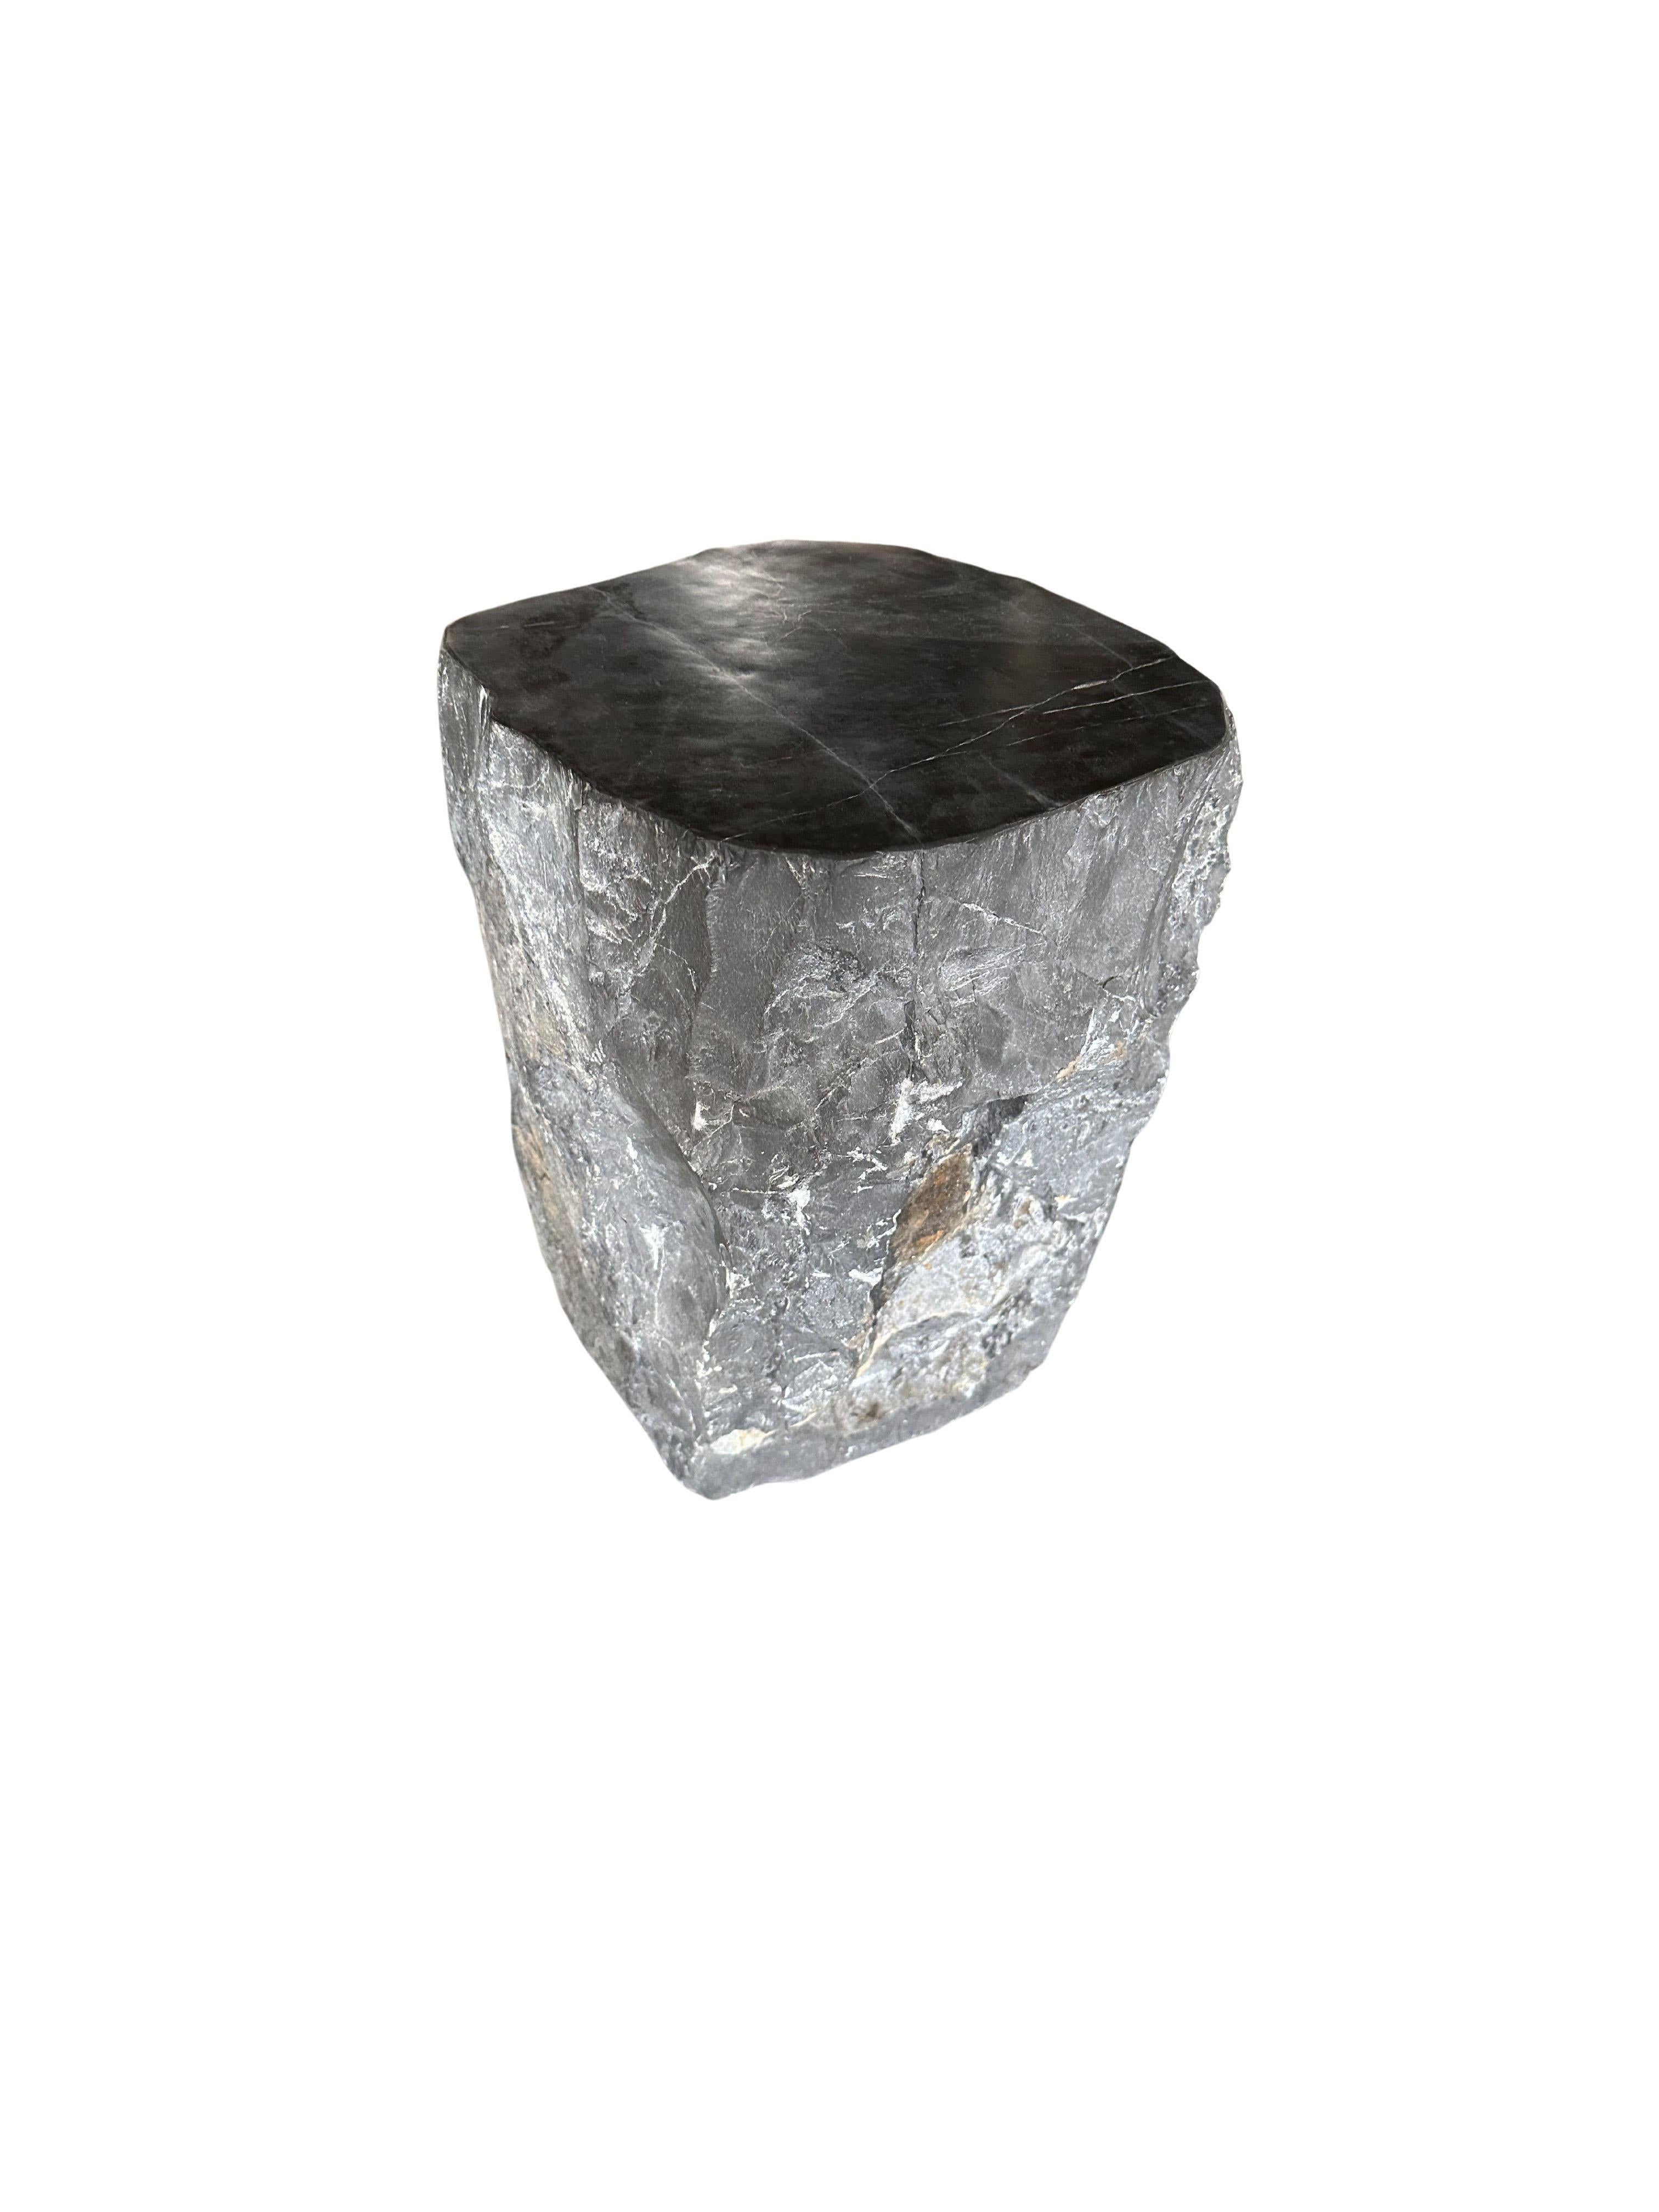 A wonderfully organic solid marble side table with a polished top and hand chiseled sides. The mix of textures and shades adds to its charm.

*The images provided in this listing are a sample of the finished product and all final products will